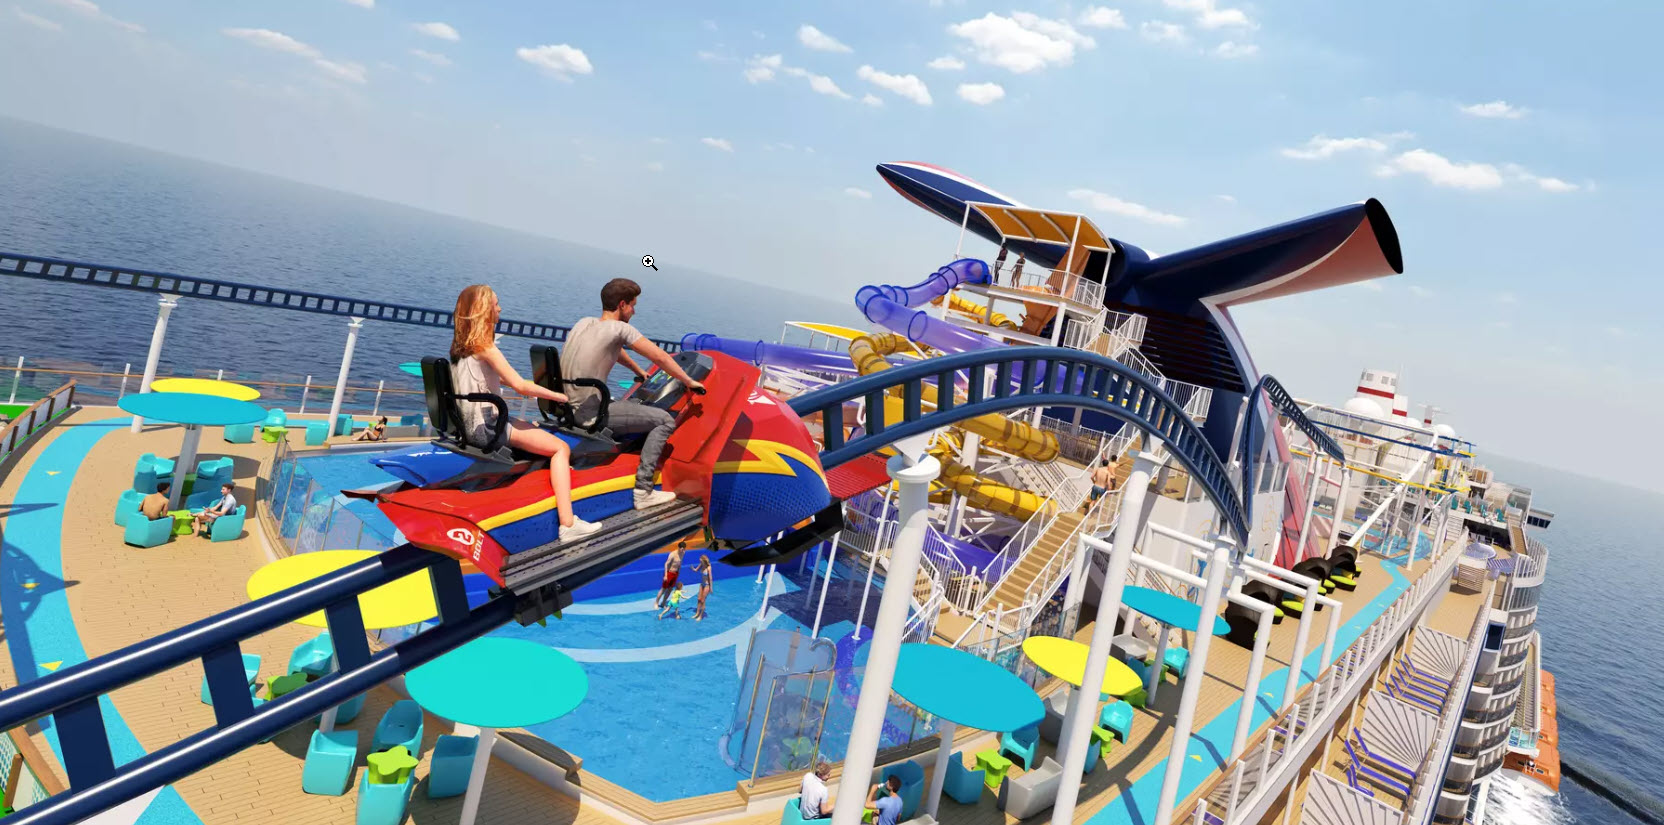 A rendering of the BOLT coller coaster on Carnival's Mardi Gras ship (source: Carnival Cruise Line)